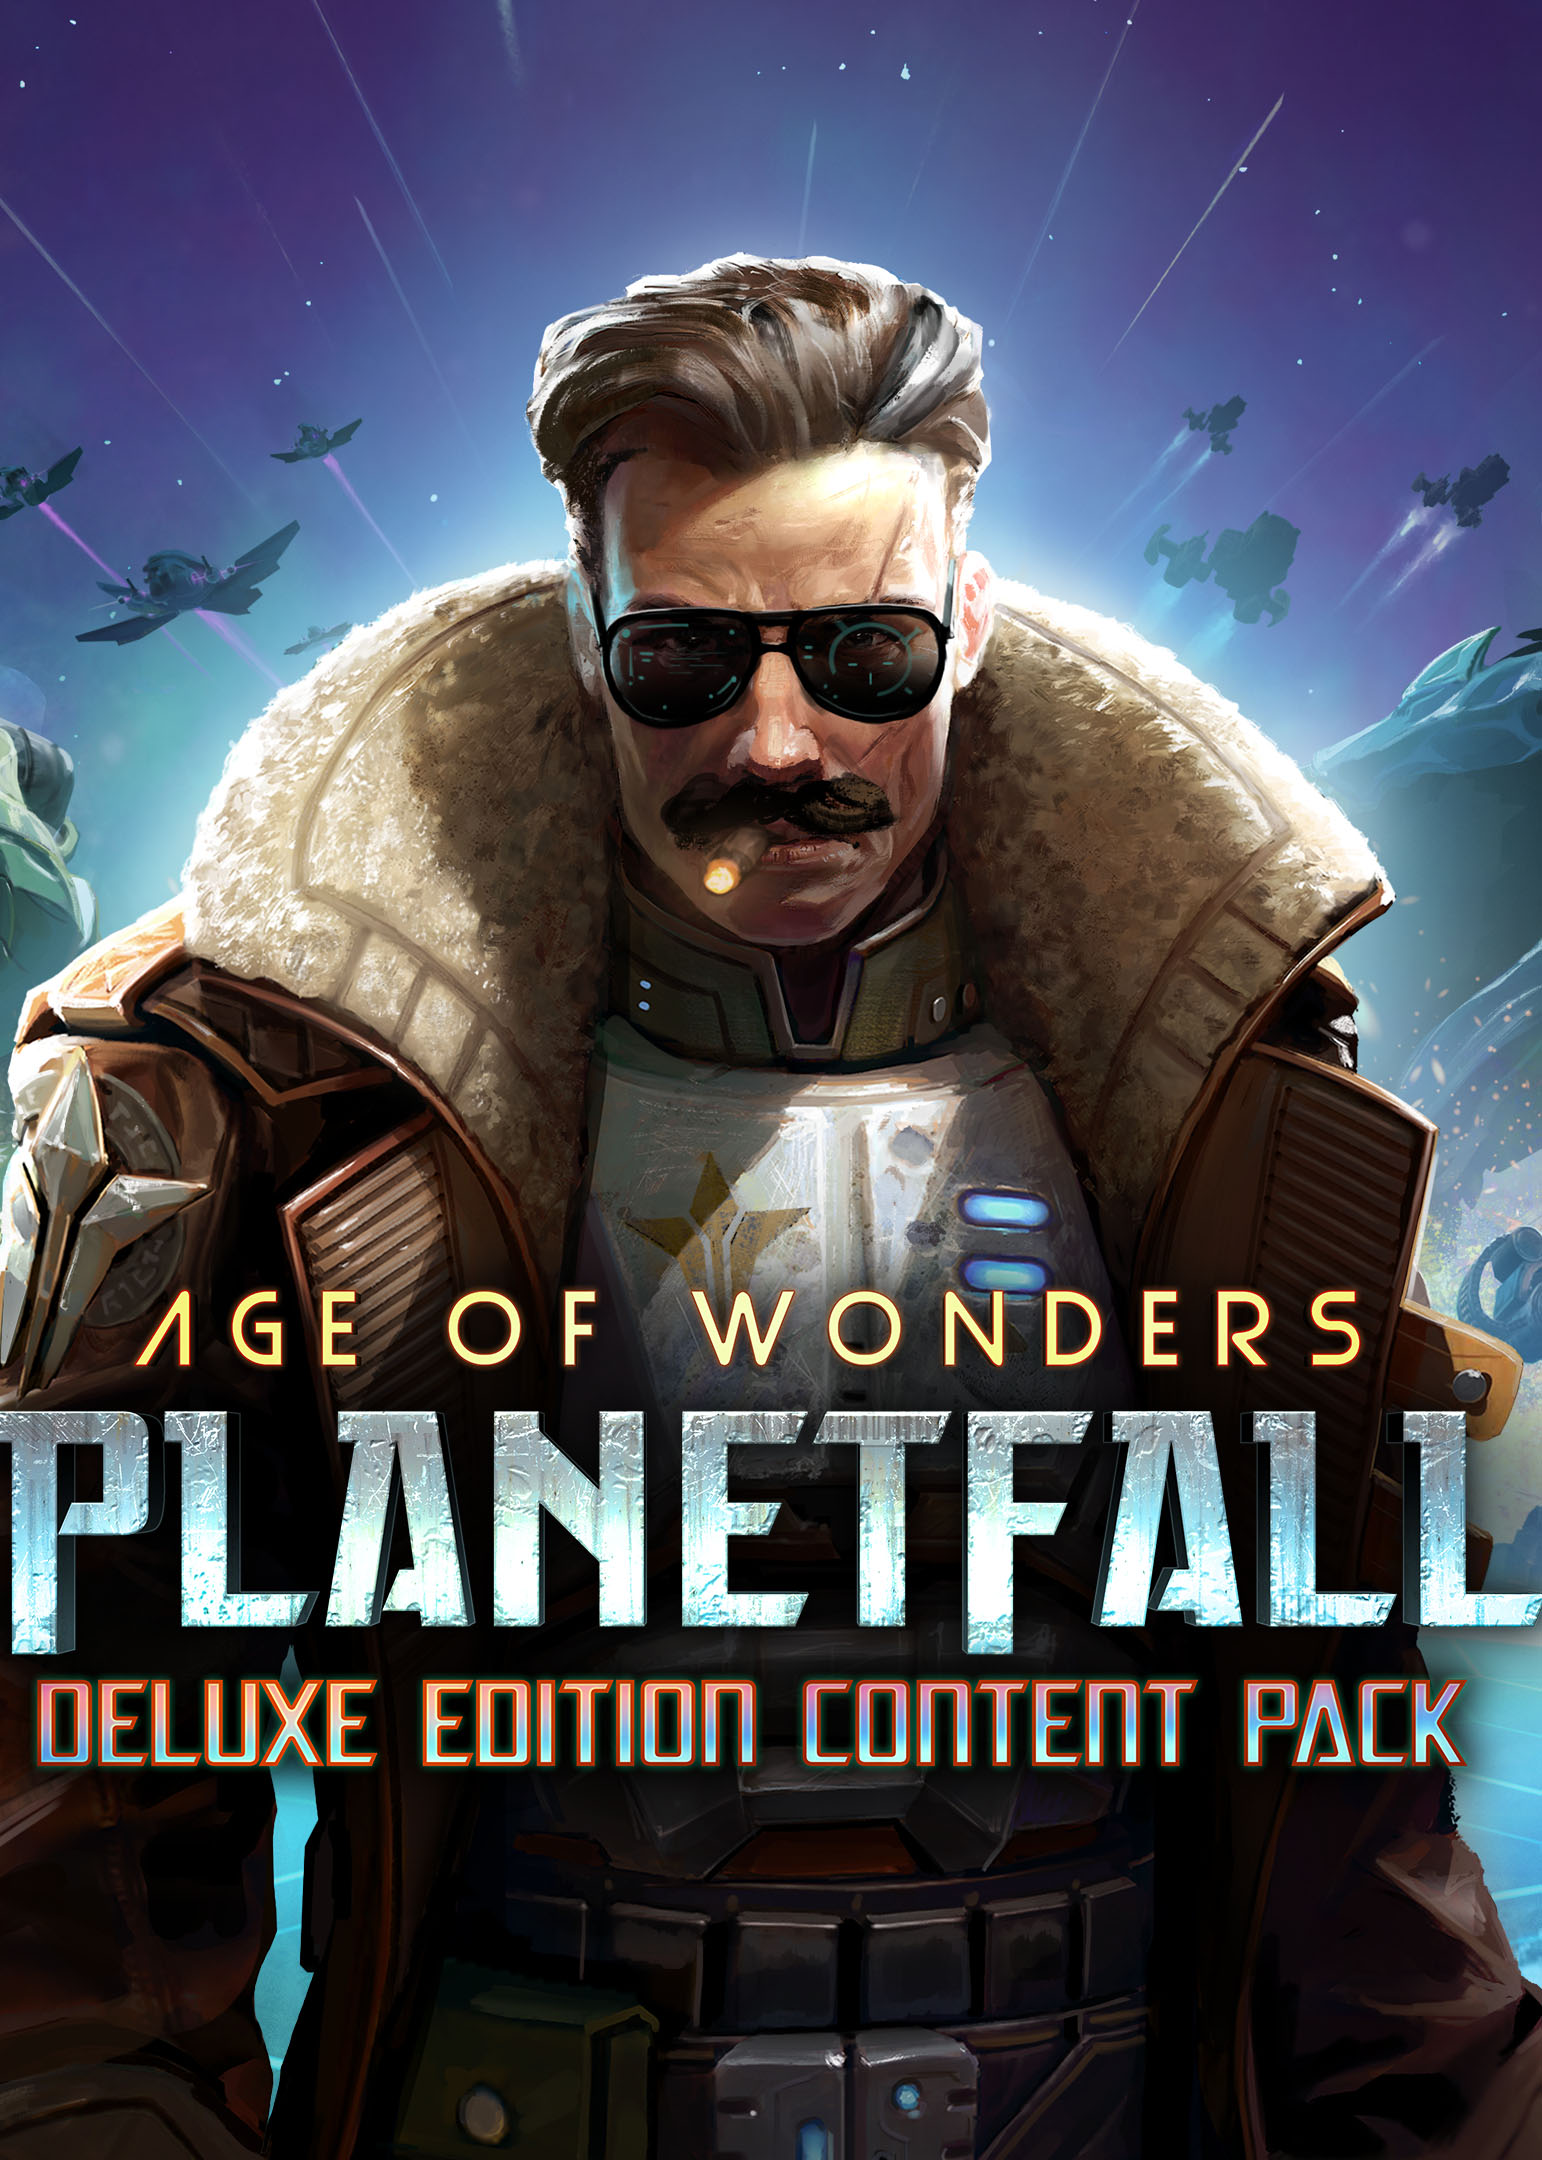 Age of Wonders: Planetfall Deluxe Edition Content